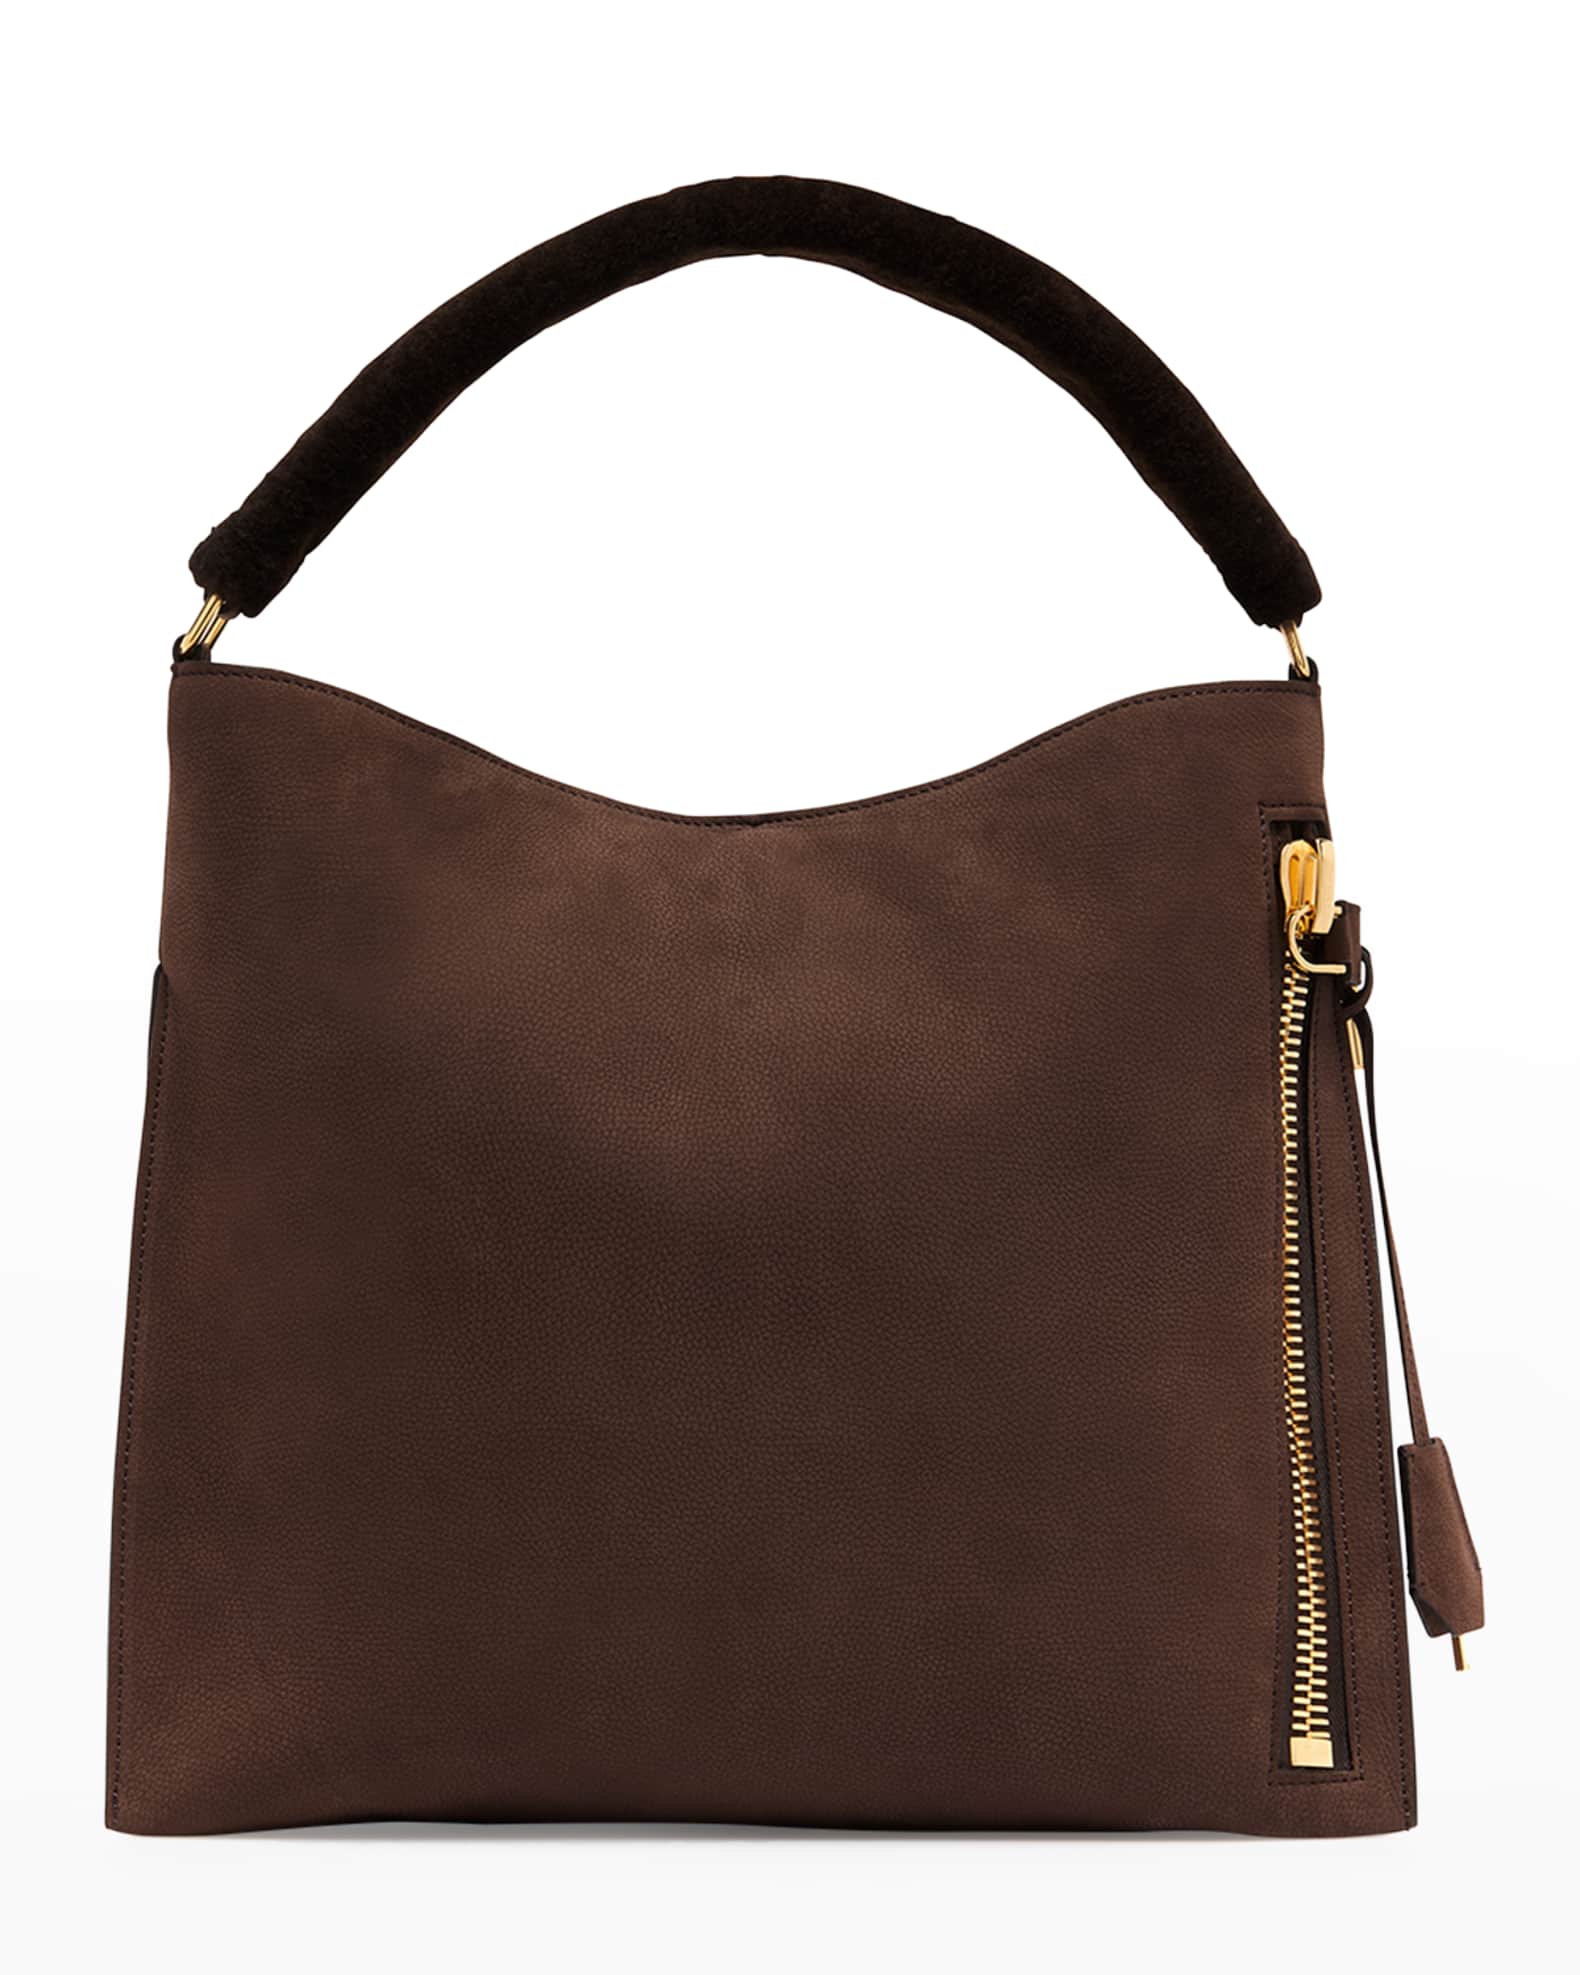 TOM FORD Crazy Small Grain Leather Hobo Bag | Neiman Marcus